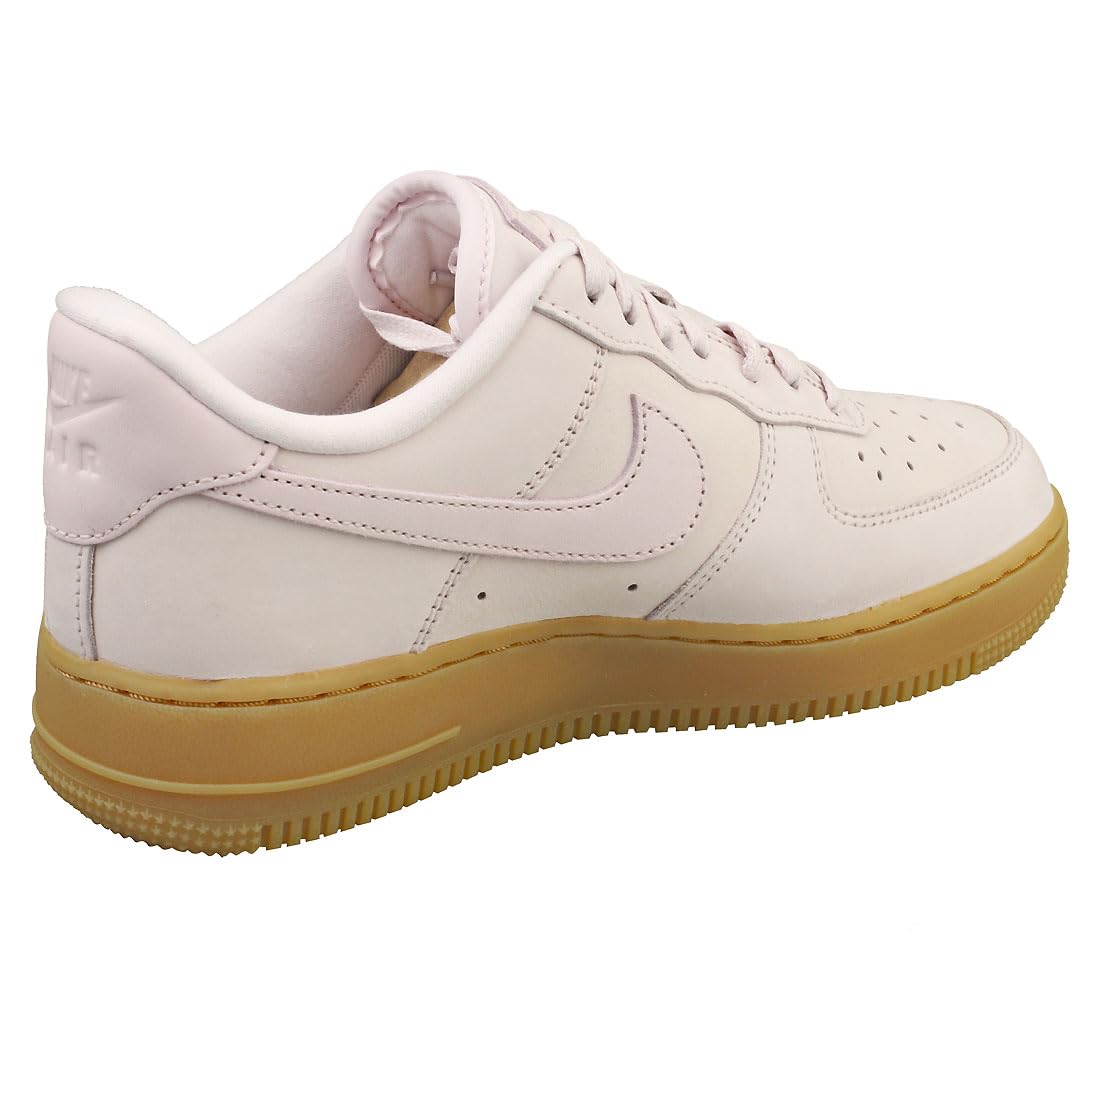 Nike AIR Force 1 Premium MF Pearl Pink/Gum DR9503 601 Women's Size 8.5